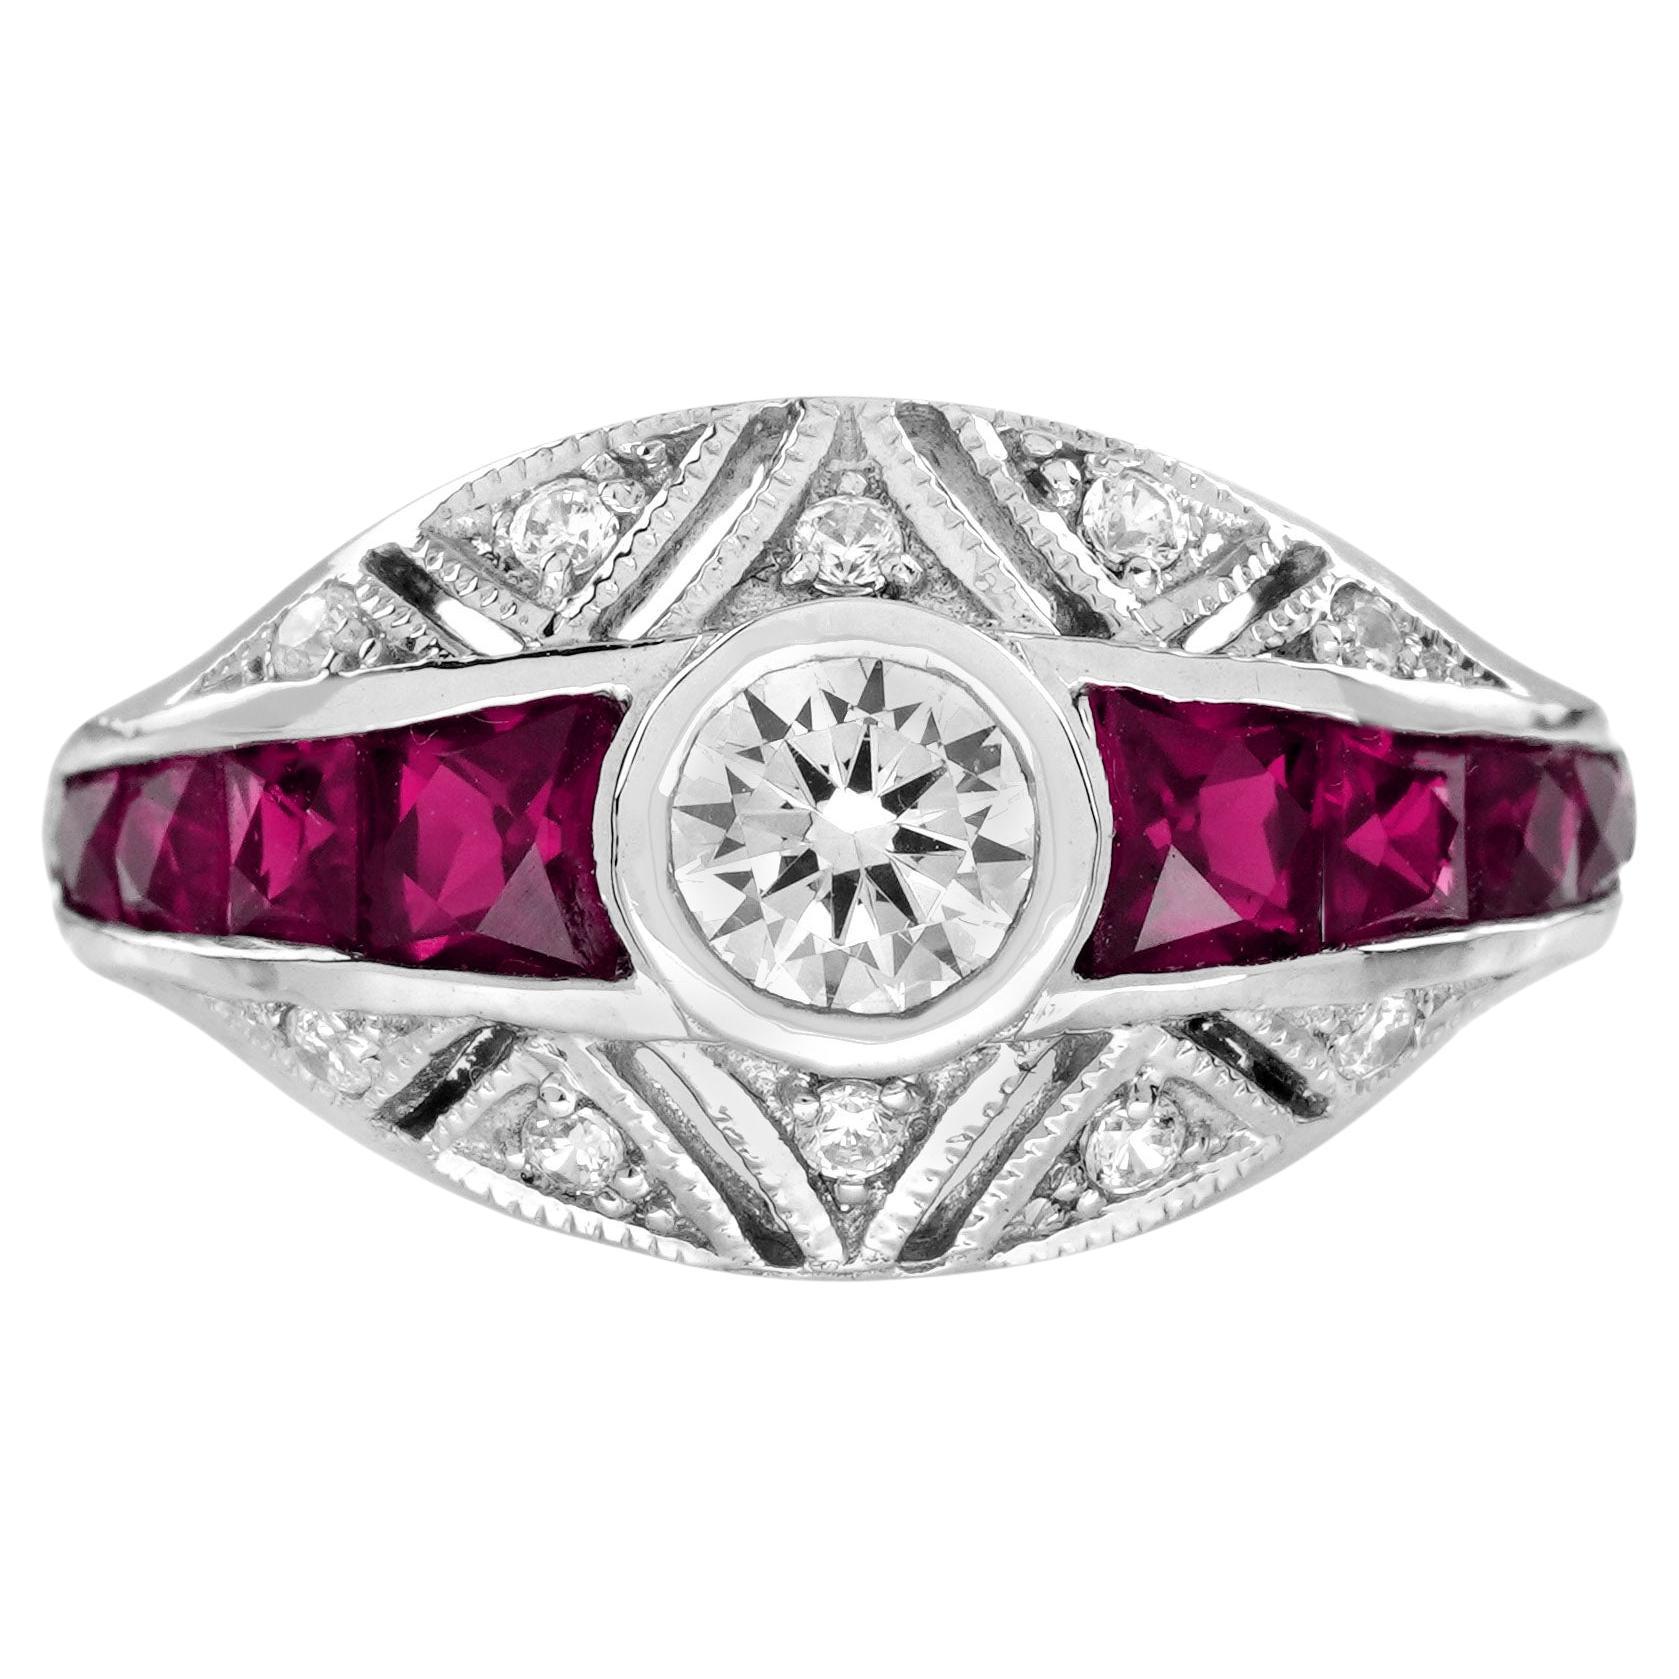 Diamond and Ruby Art Deco Style Bombay Ring in 18K White Gold